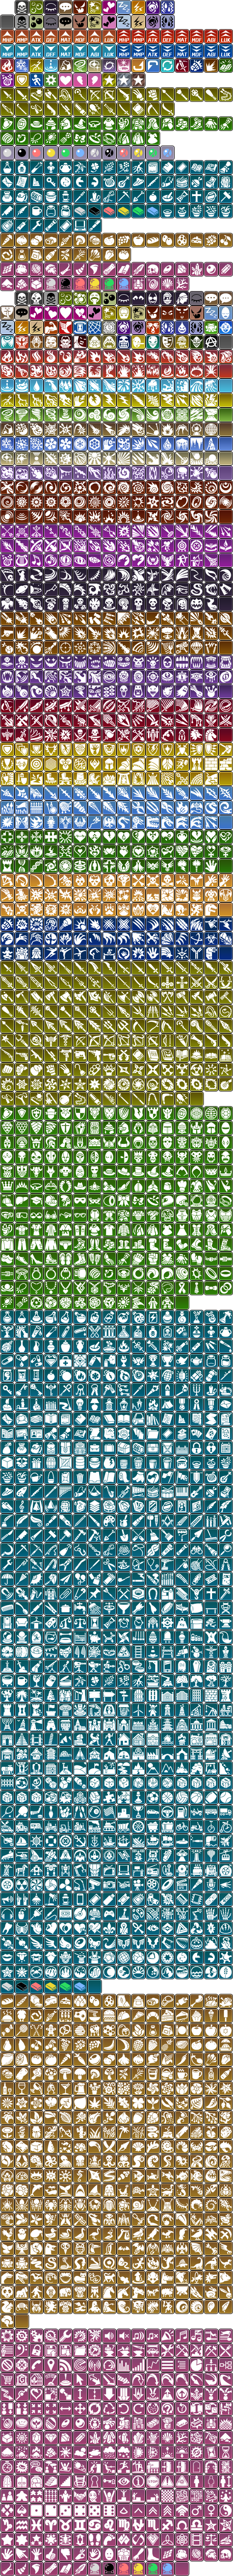 IconSet.png